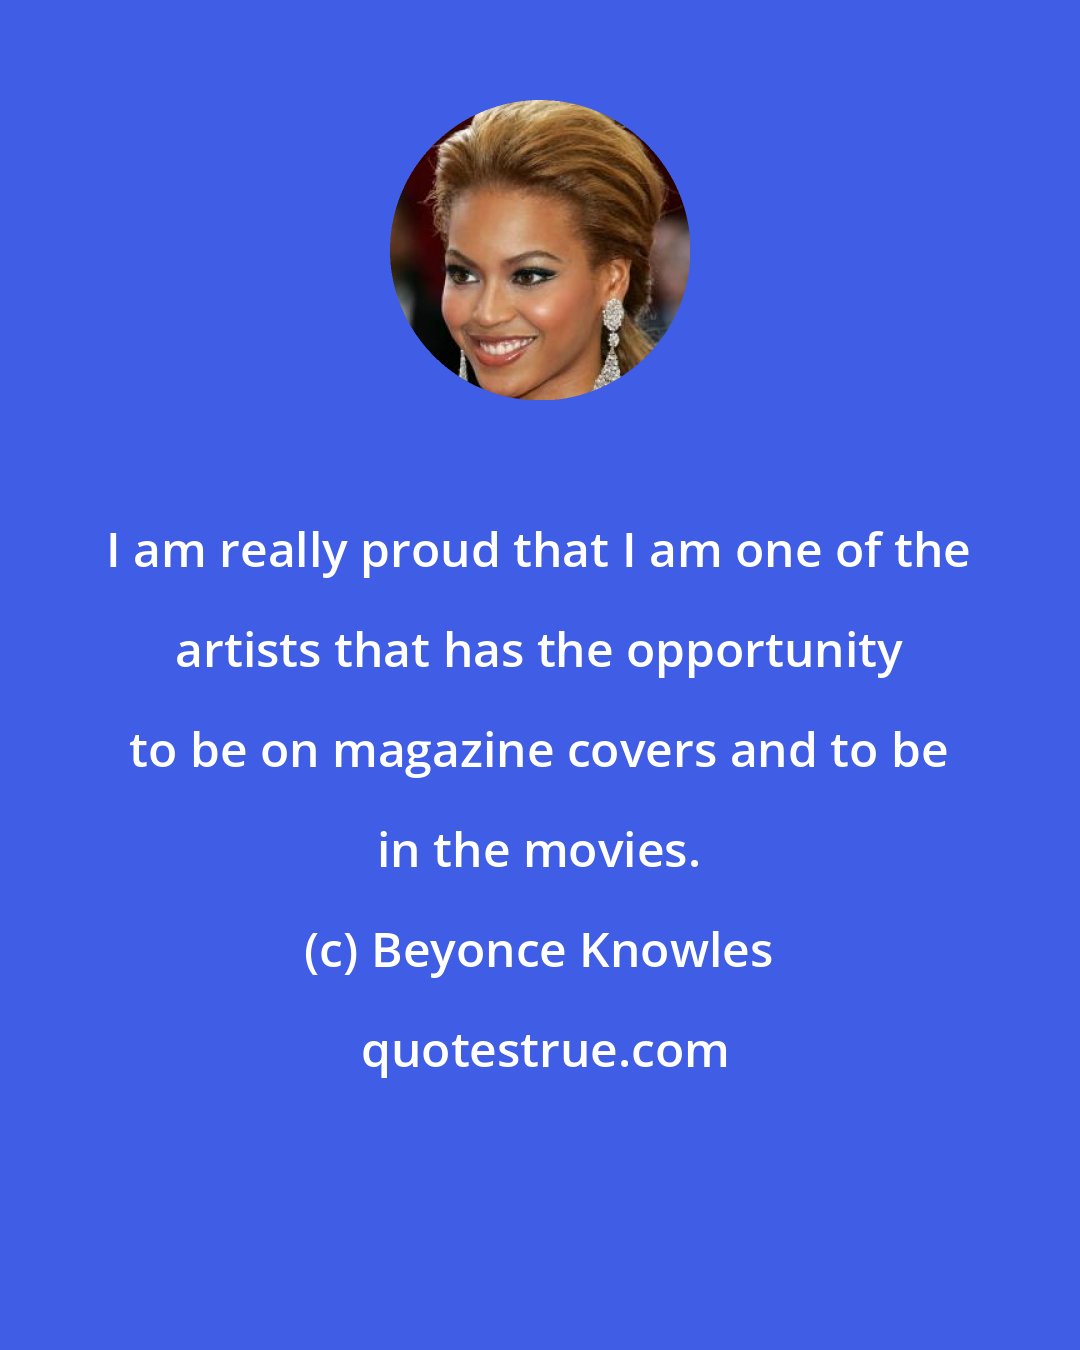 Beyonce Knowles: I am really proud that I am one of the artists that has the opportunity to be on magazine covers and to be in the movies.